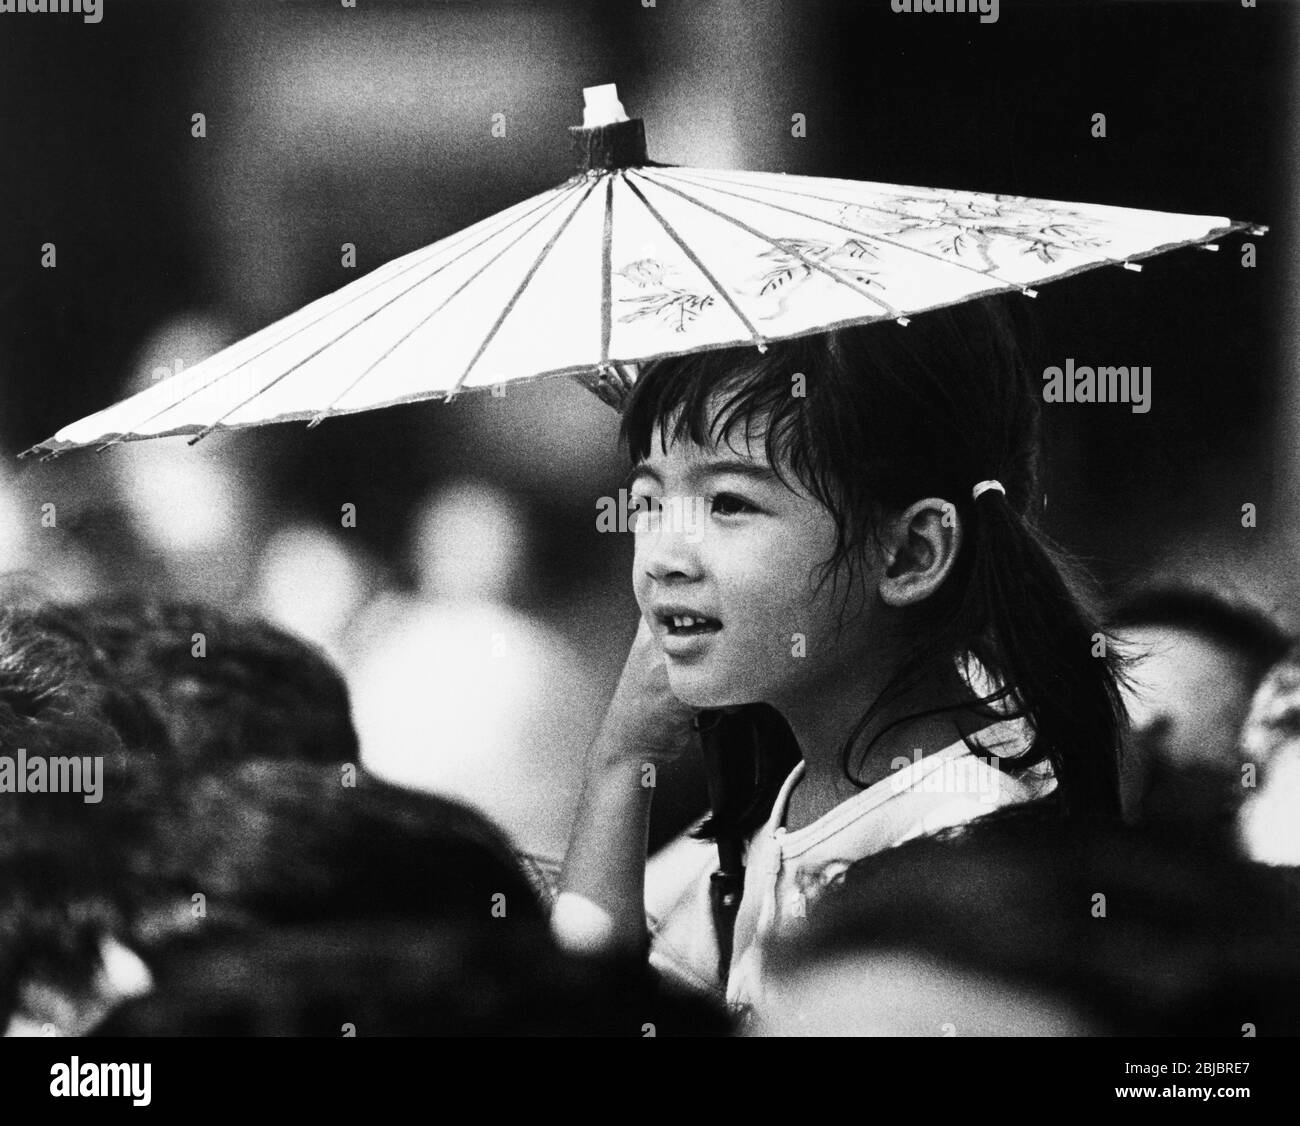 Hong Kong October 1986 A young girl waits in the crowd for the arrival of Queen Elizabeth II of Great Britainas she arrives at Victoria Harbour. The picture is is part of a collection of photographs taken in Hong Kong between September and November, 1986. They represent a snapshot of Daily Life in the Crown Colony eleven years before sovereignty was transferred back to mainland China. Photograph by Howard Walker / Alamy. Stock Photo